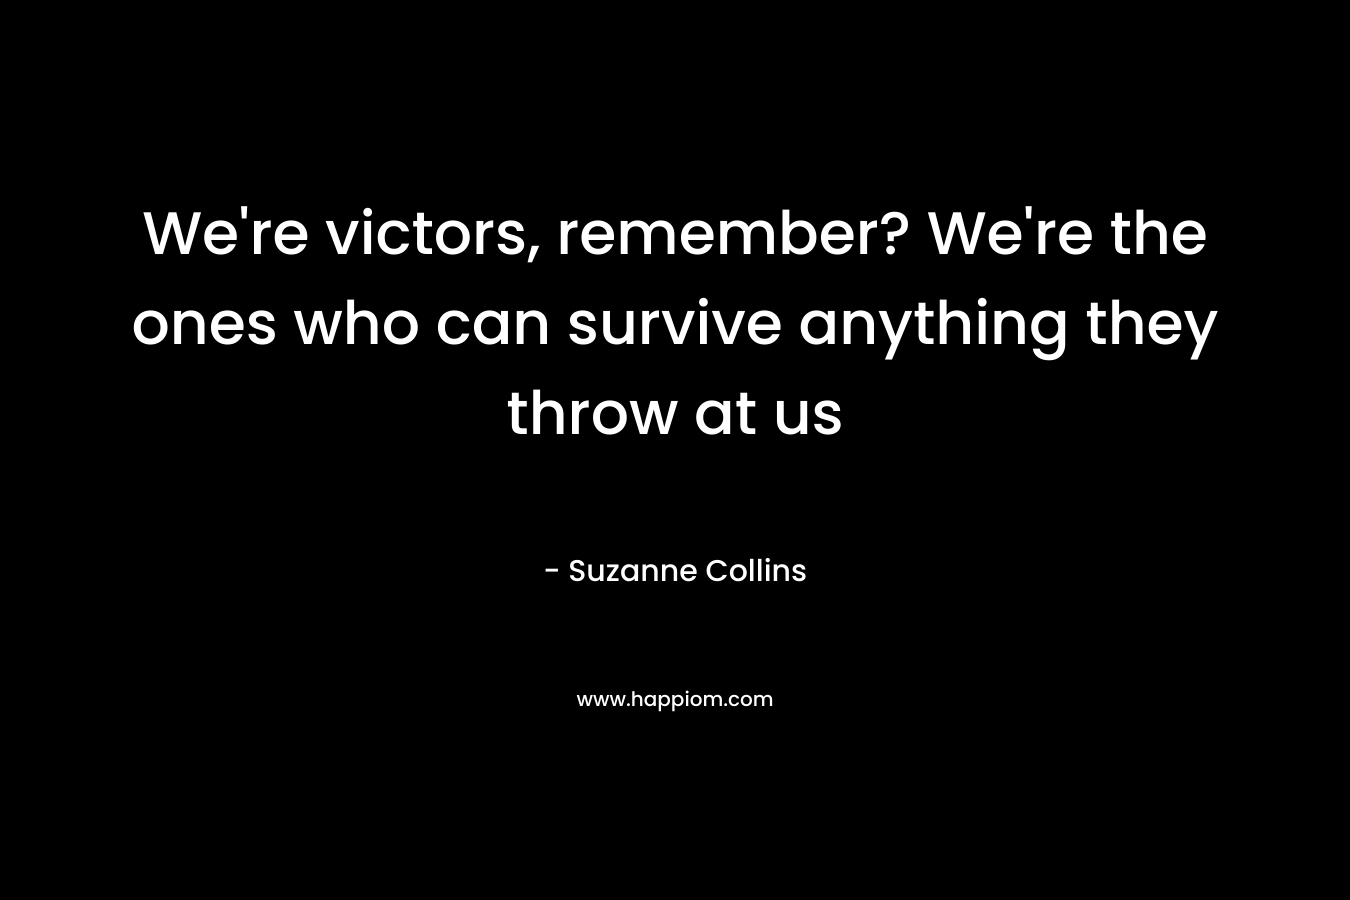 We’re victors, remember? We’re the ones who can survive anything they throw at us – Suzanne Collins